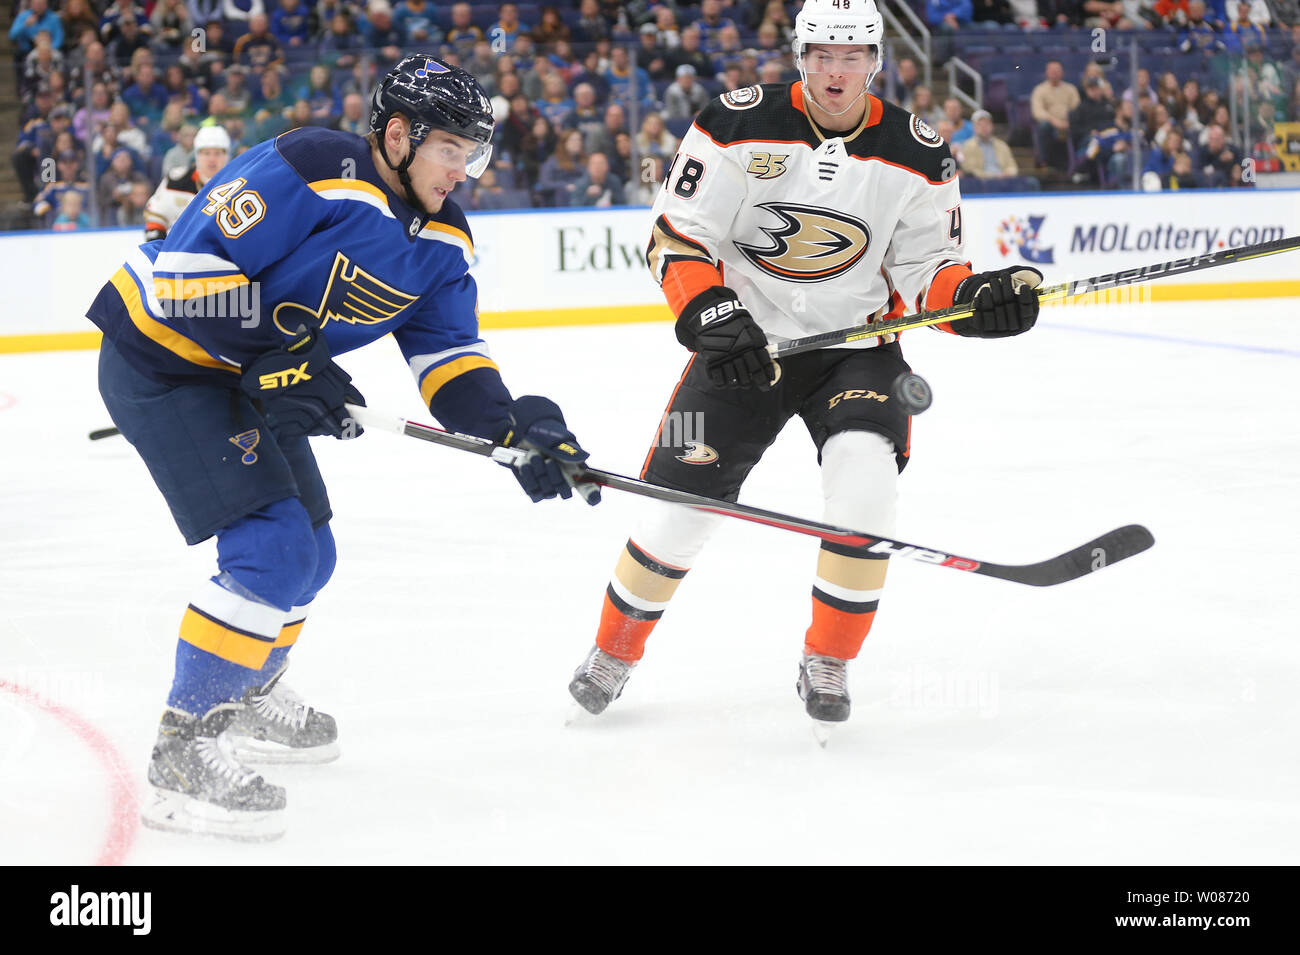 St. Louis Blues Ivan Barbashev of Russia and Anaheim Ducks Isac Lundestrom of Sweden, battle for airborne puck in the first period at the Enterprise Center in St. Louis on October 14, 2018.   Photo by Bill Greenblatt/UPI Stock Photo